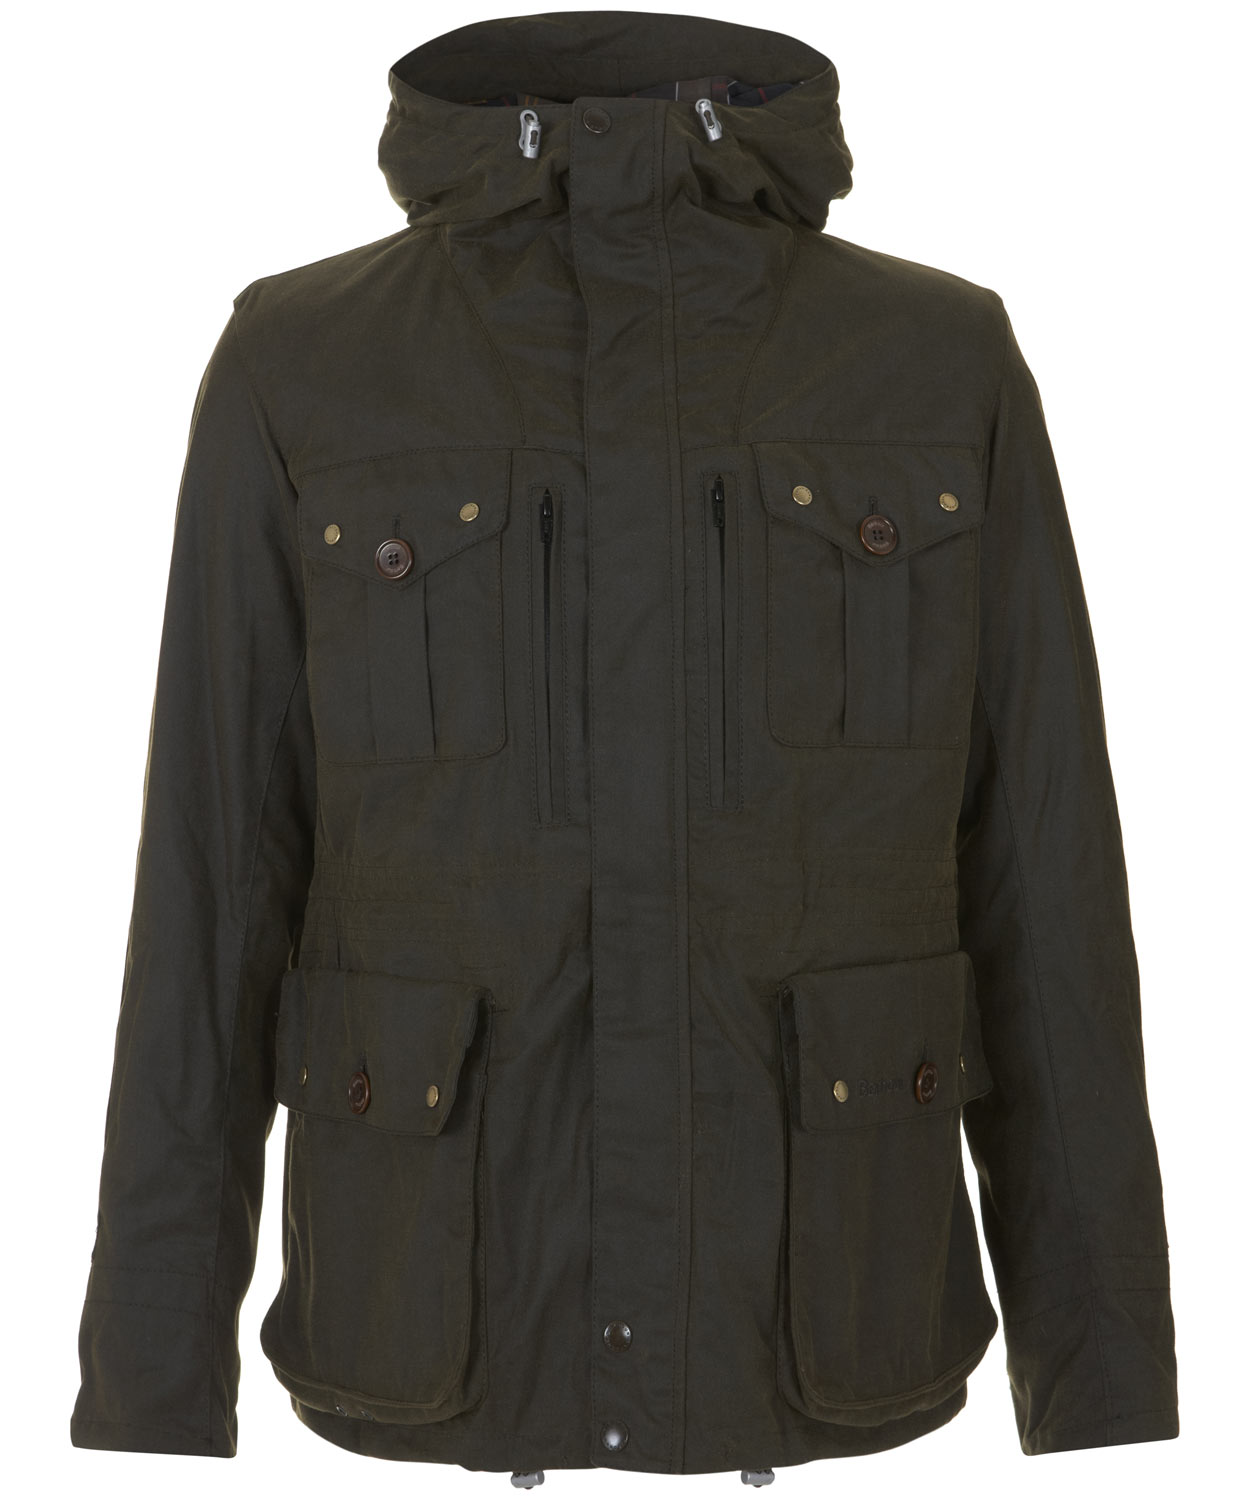 Lyst - Barbour Olive Mountain Parka Wax Jacket in Green for Men